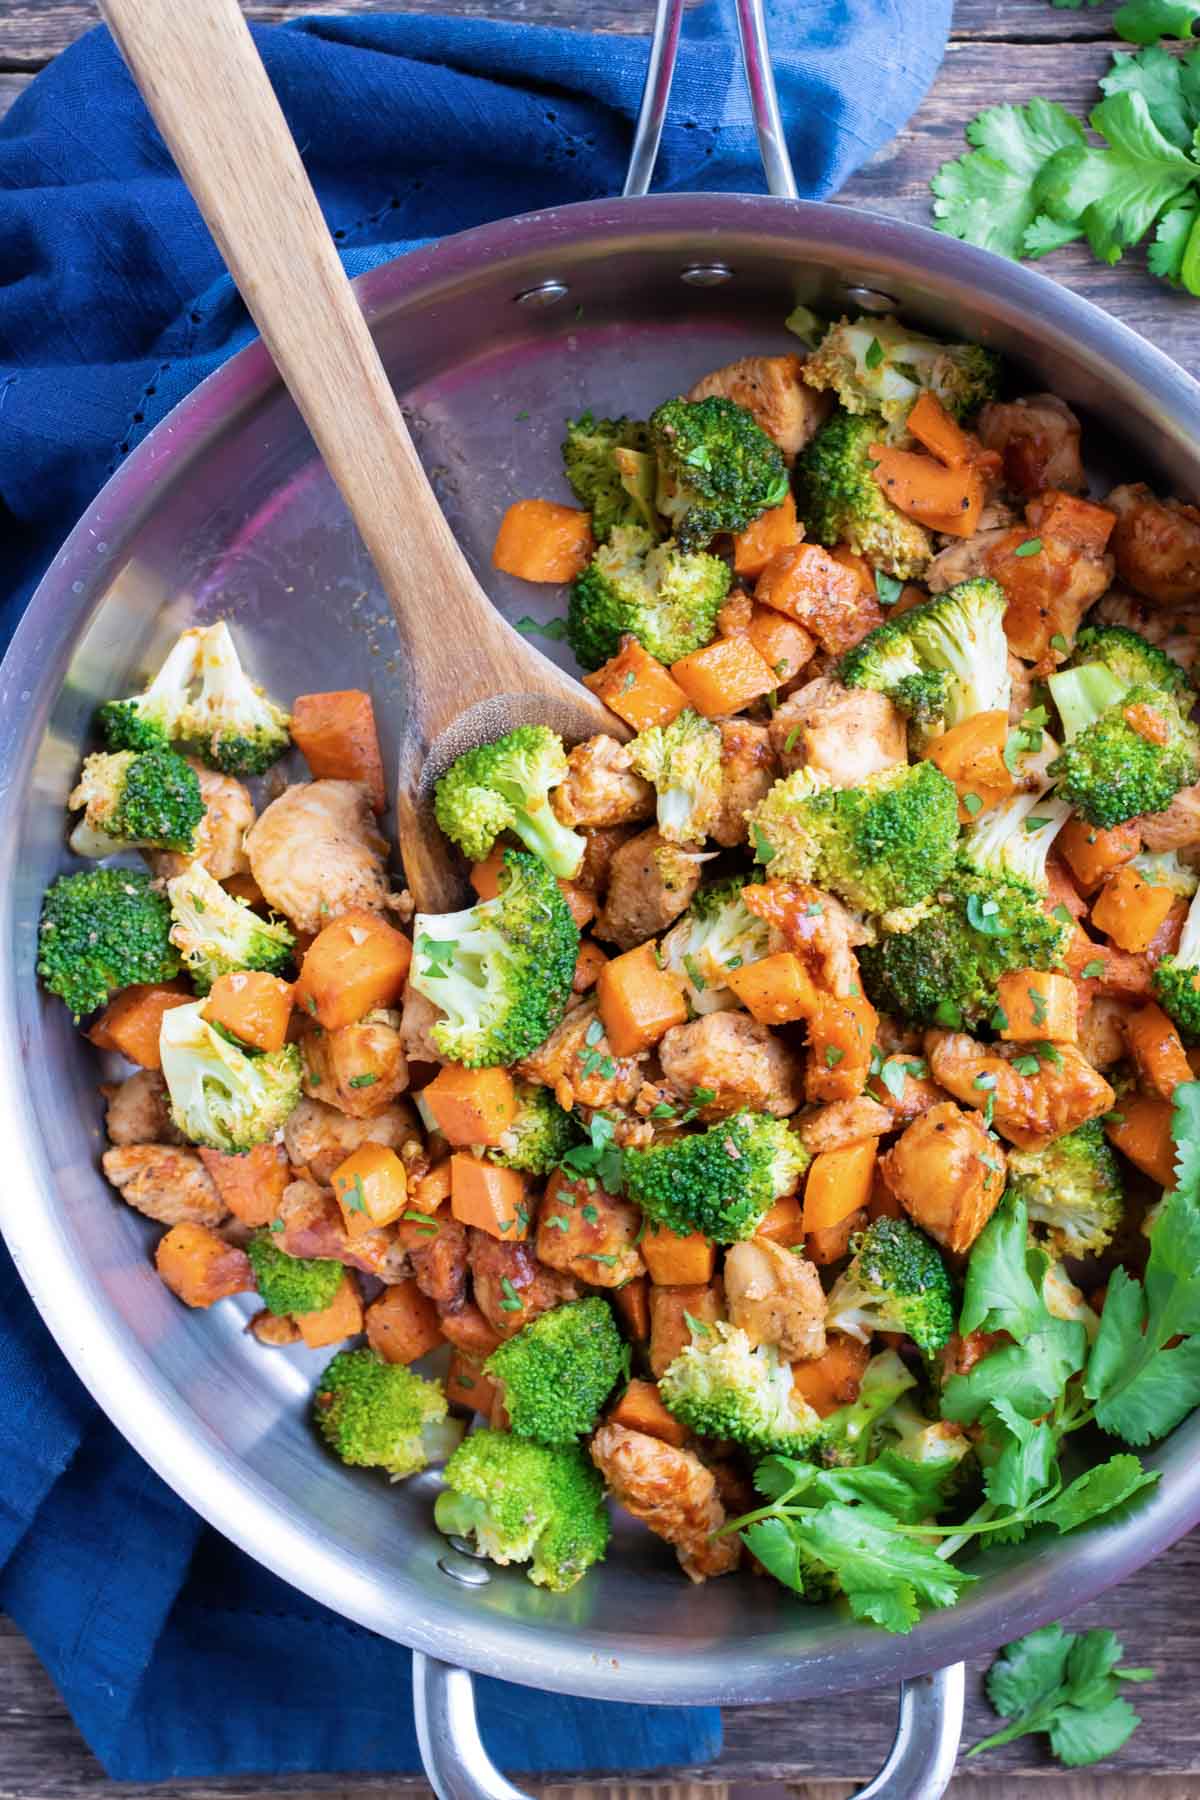 A large skillet with sweet potatoes, broccoli, and chicken covered in a honey barbecue sauce.